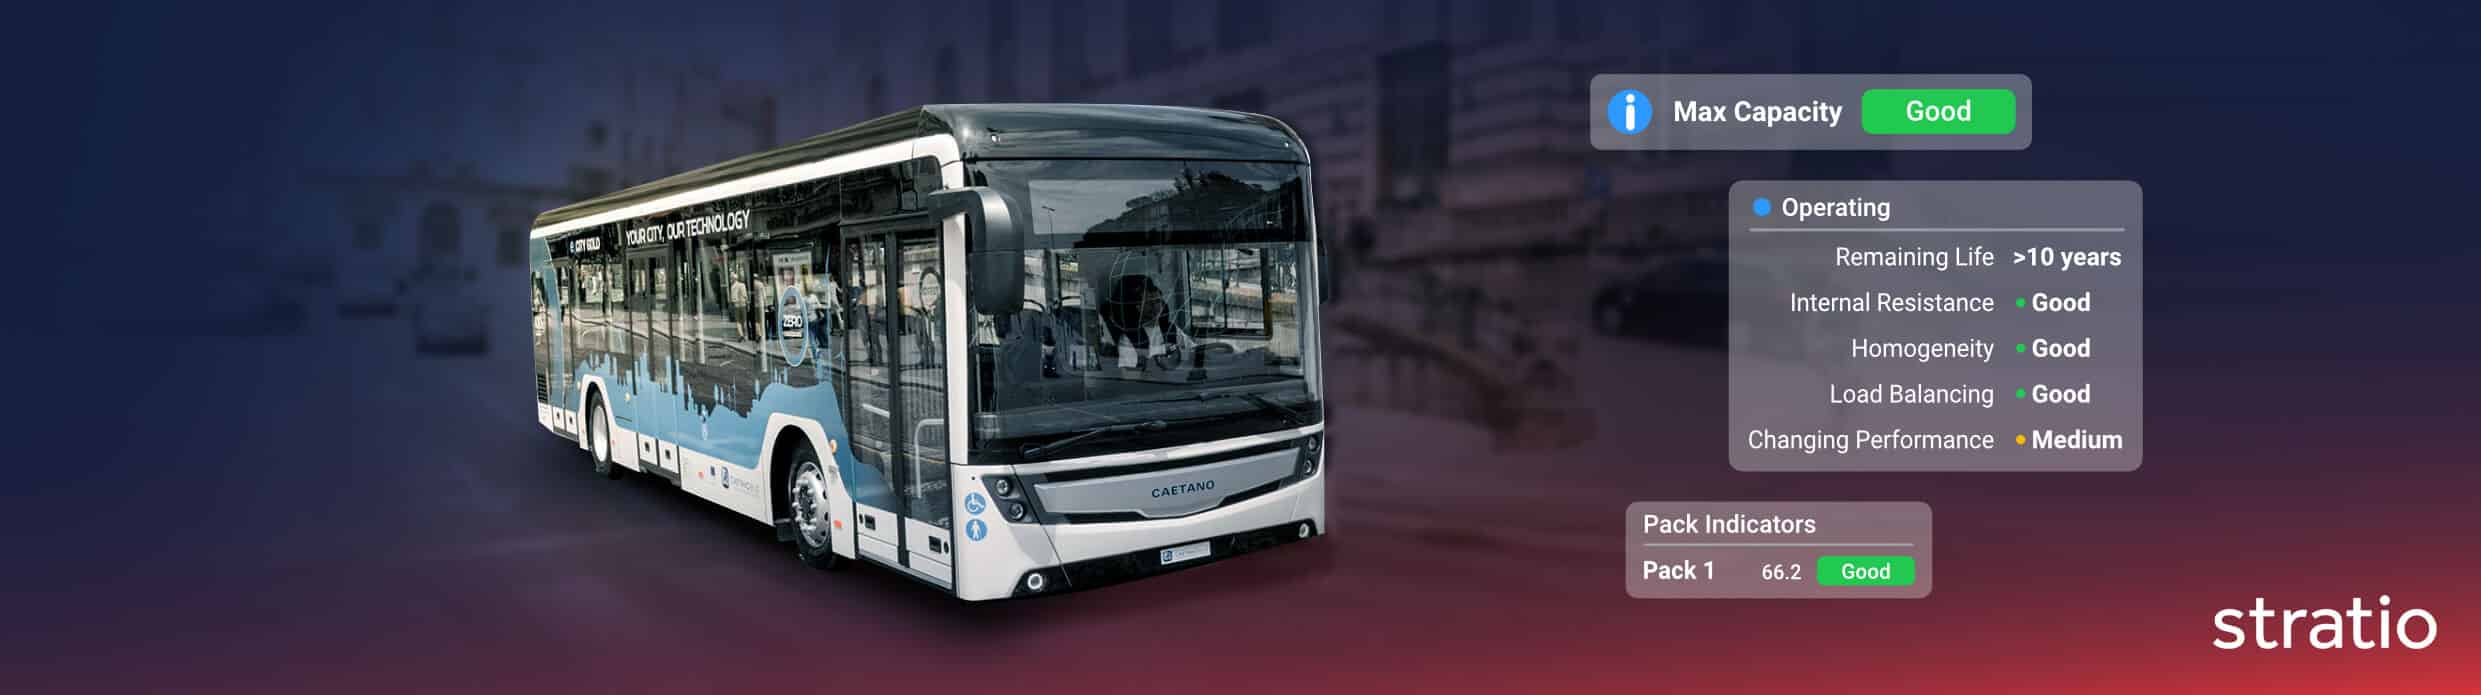 Transitioning to electric buses